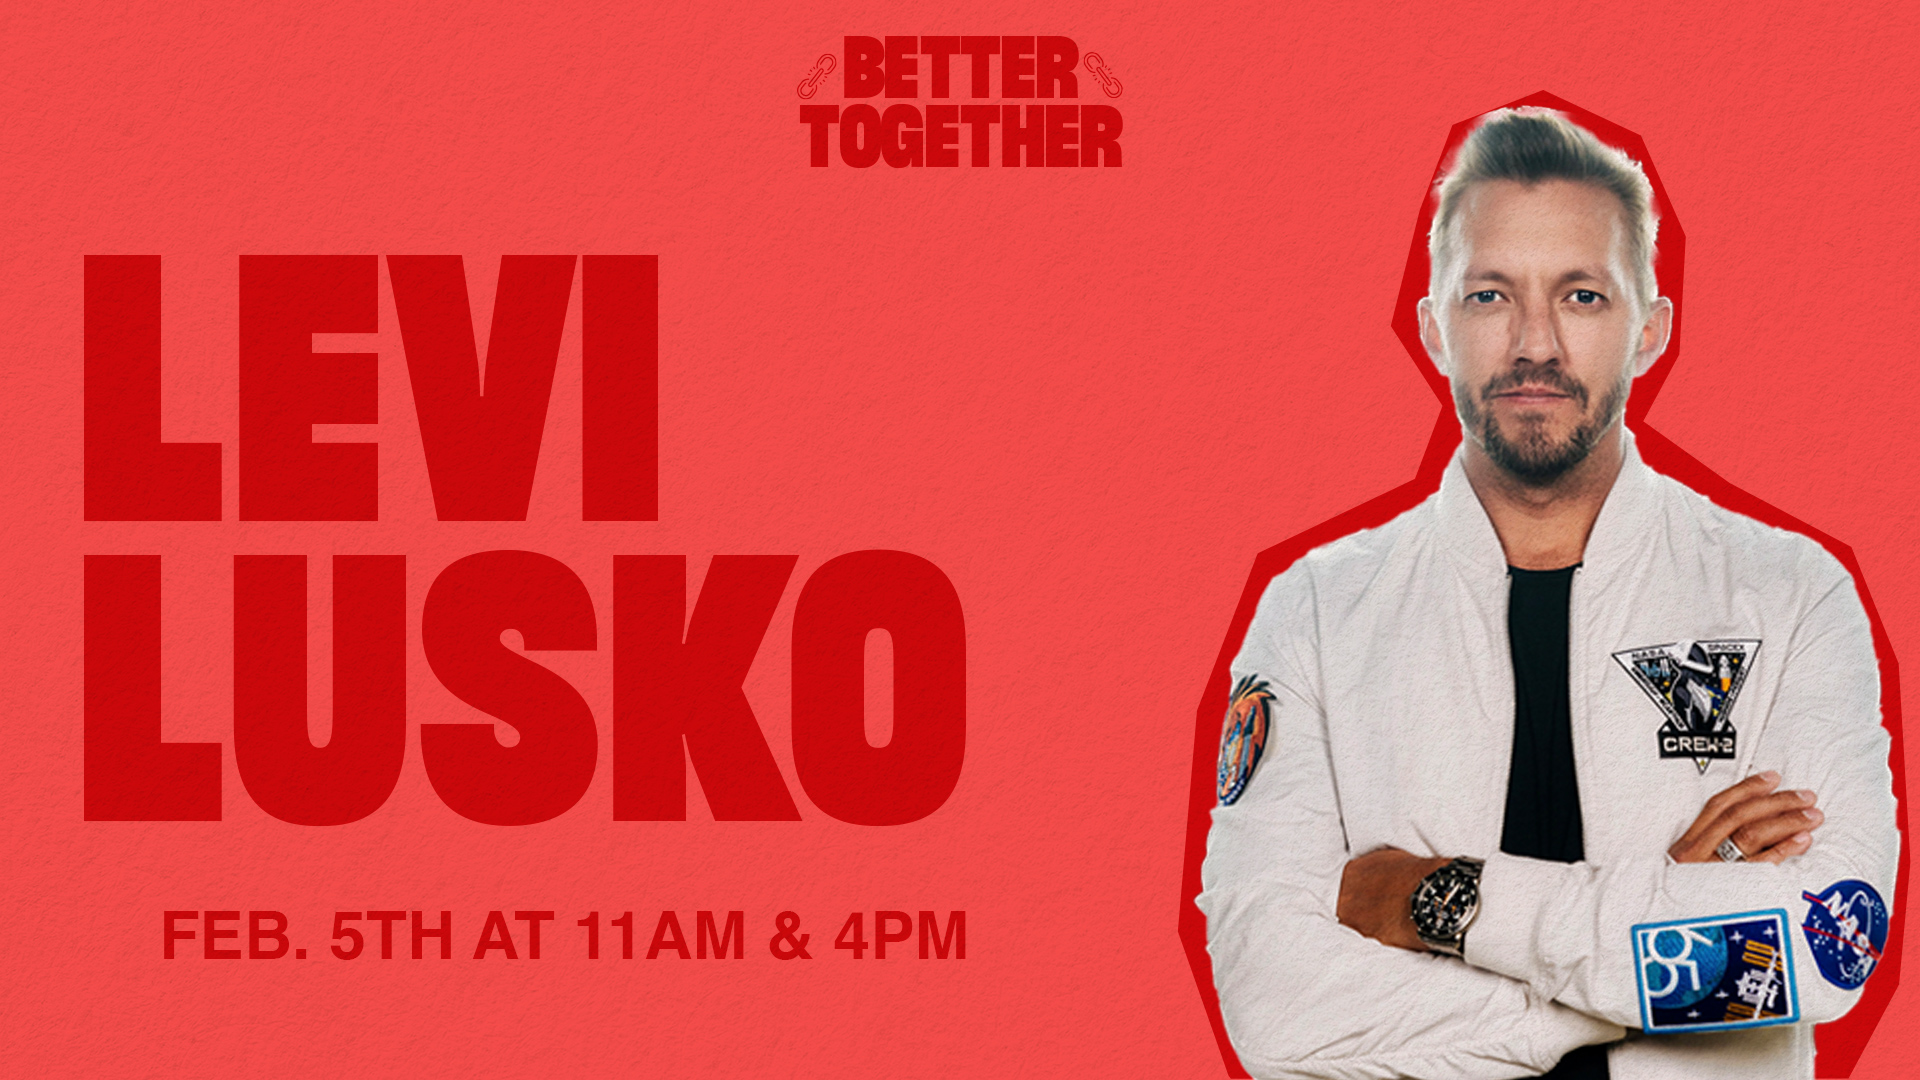 Better Together: Levi Lusko at the Cumming campus